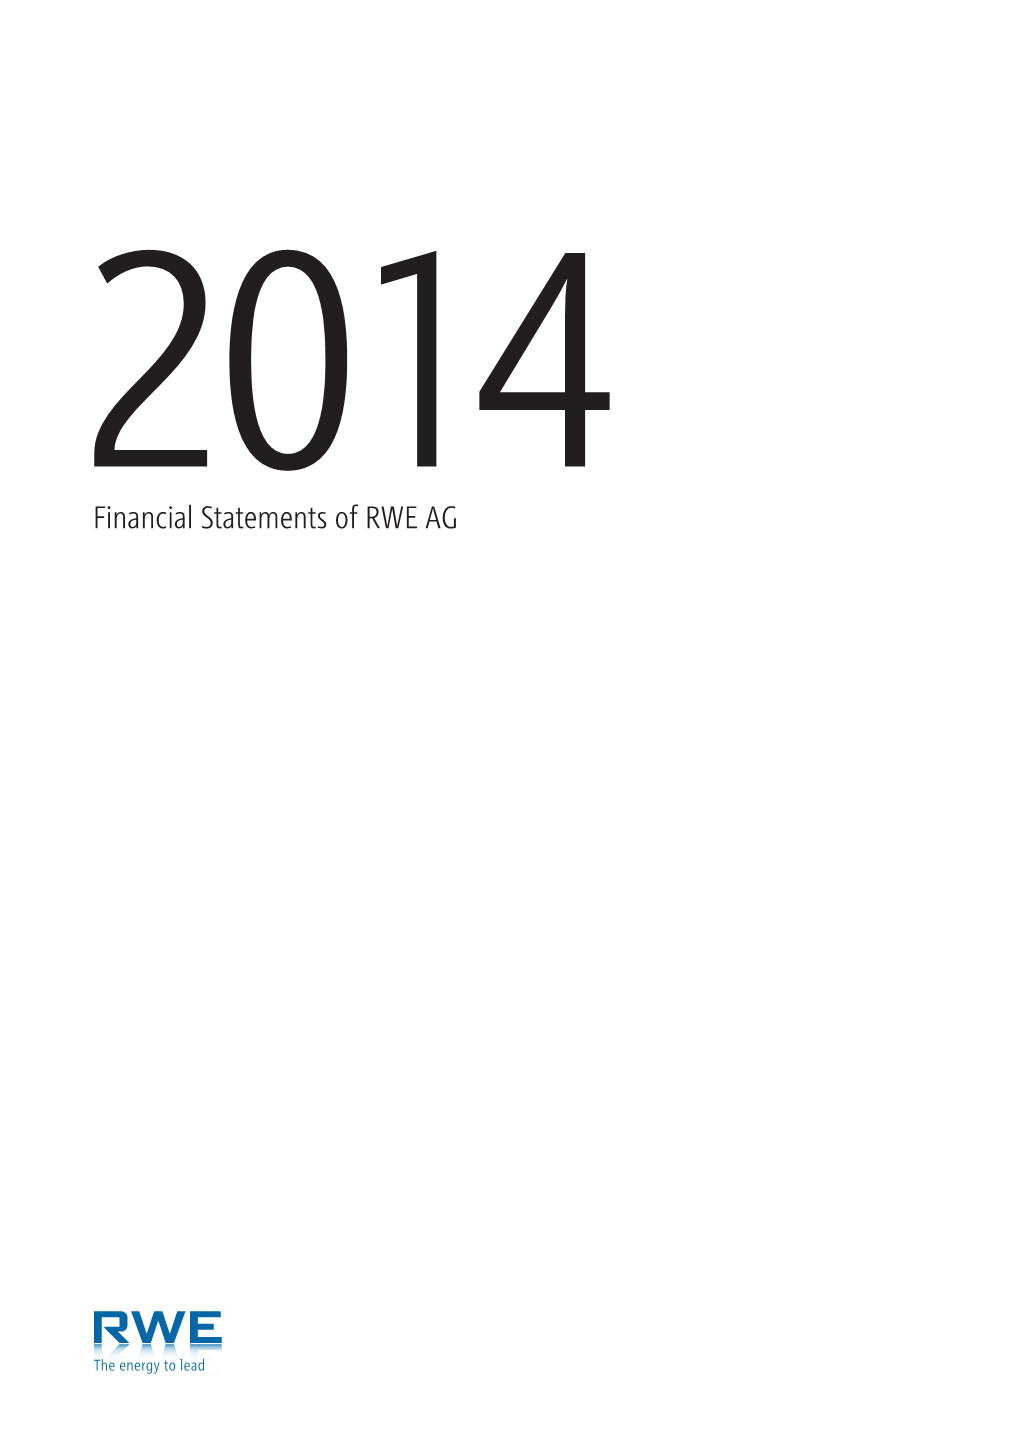 Financial Statements of RWE AG 2014